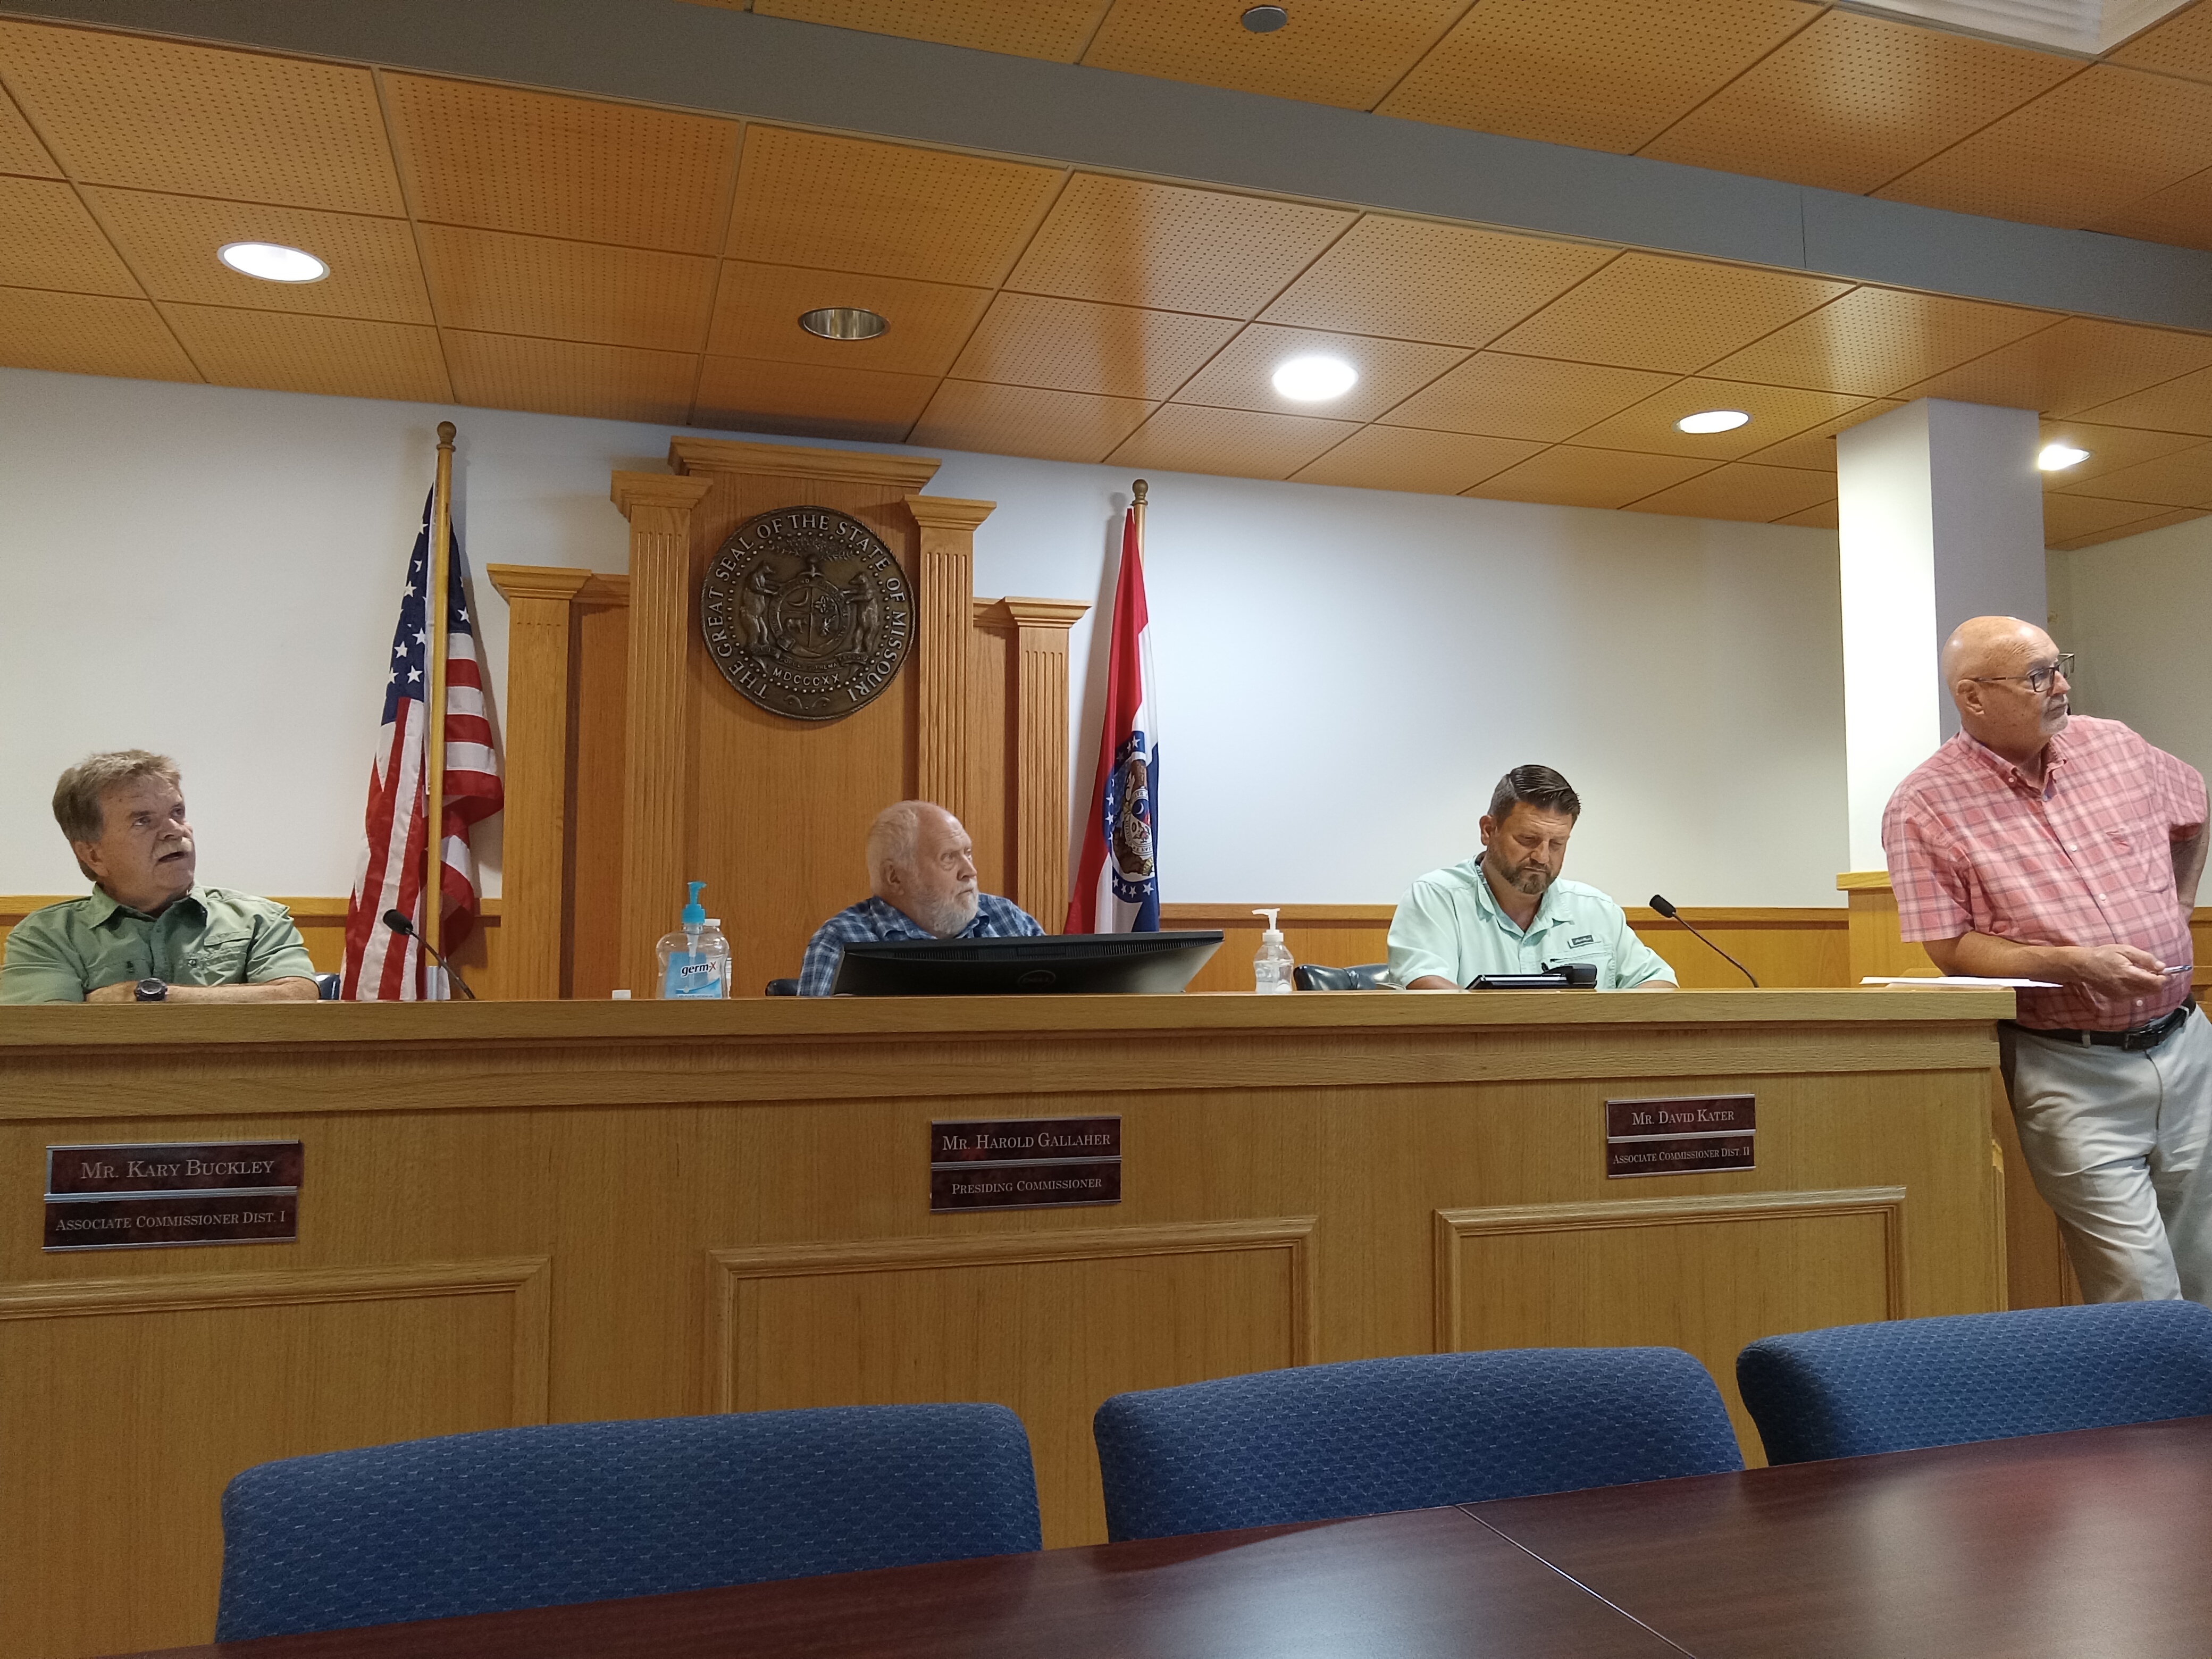 St. Francois County Commission Awards Opioid Commission Funding